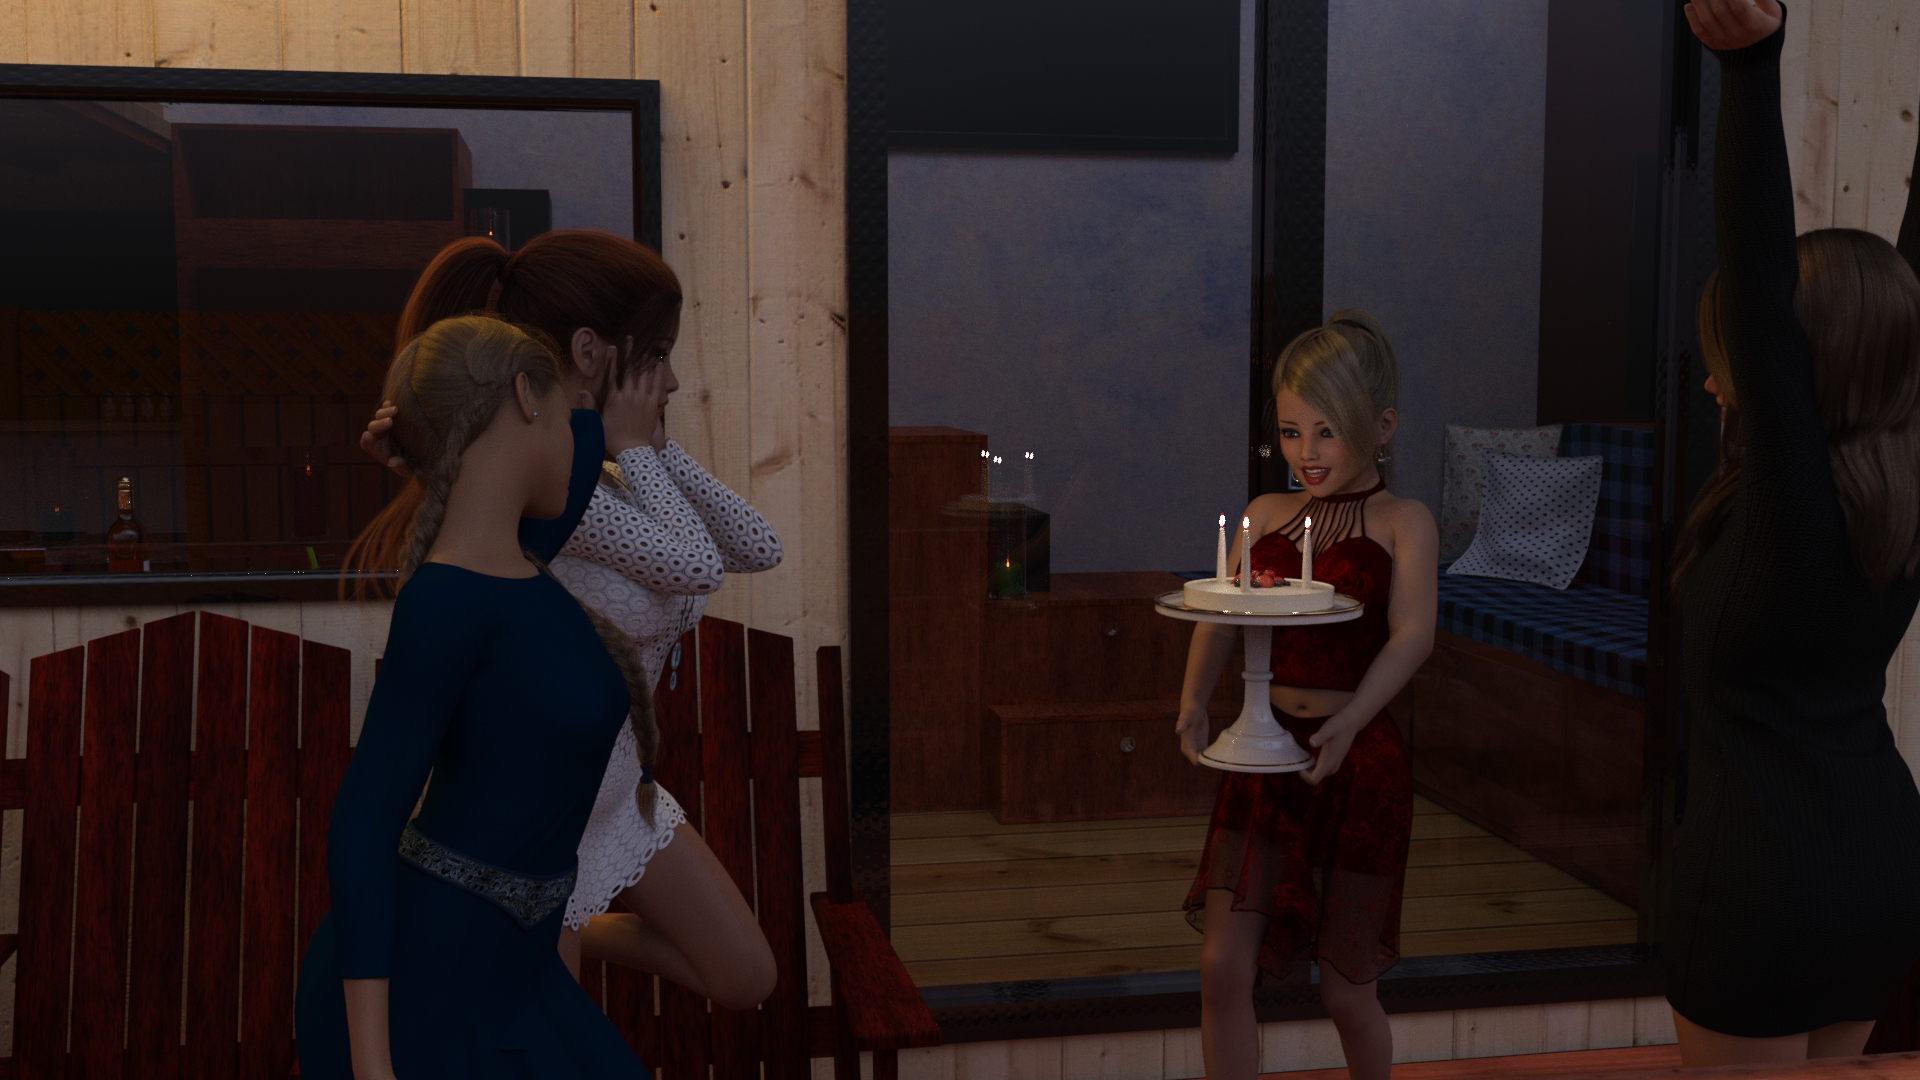 You will see, it's hard for the girls to blow out the candles especial...